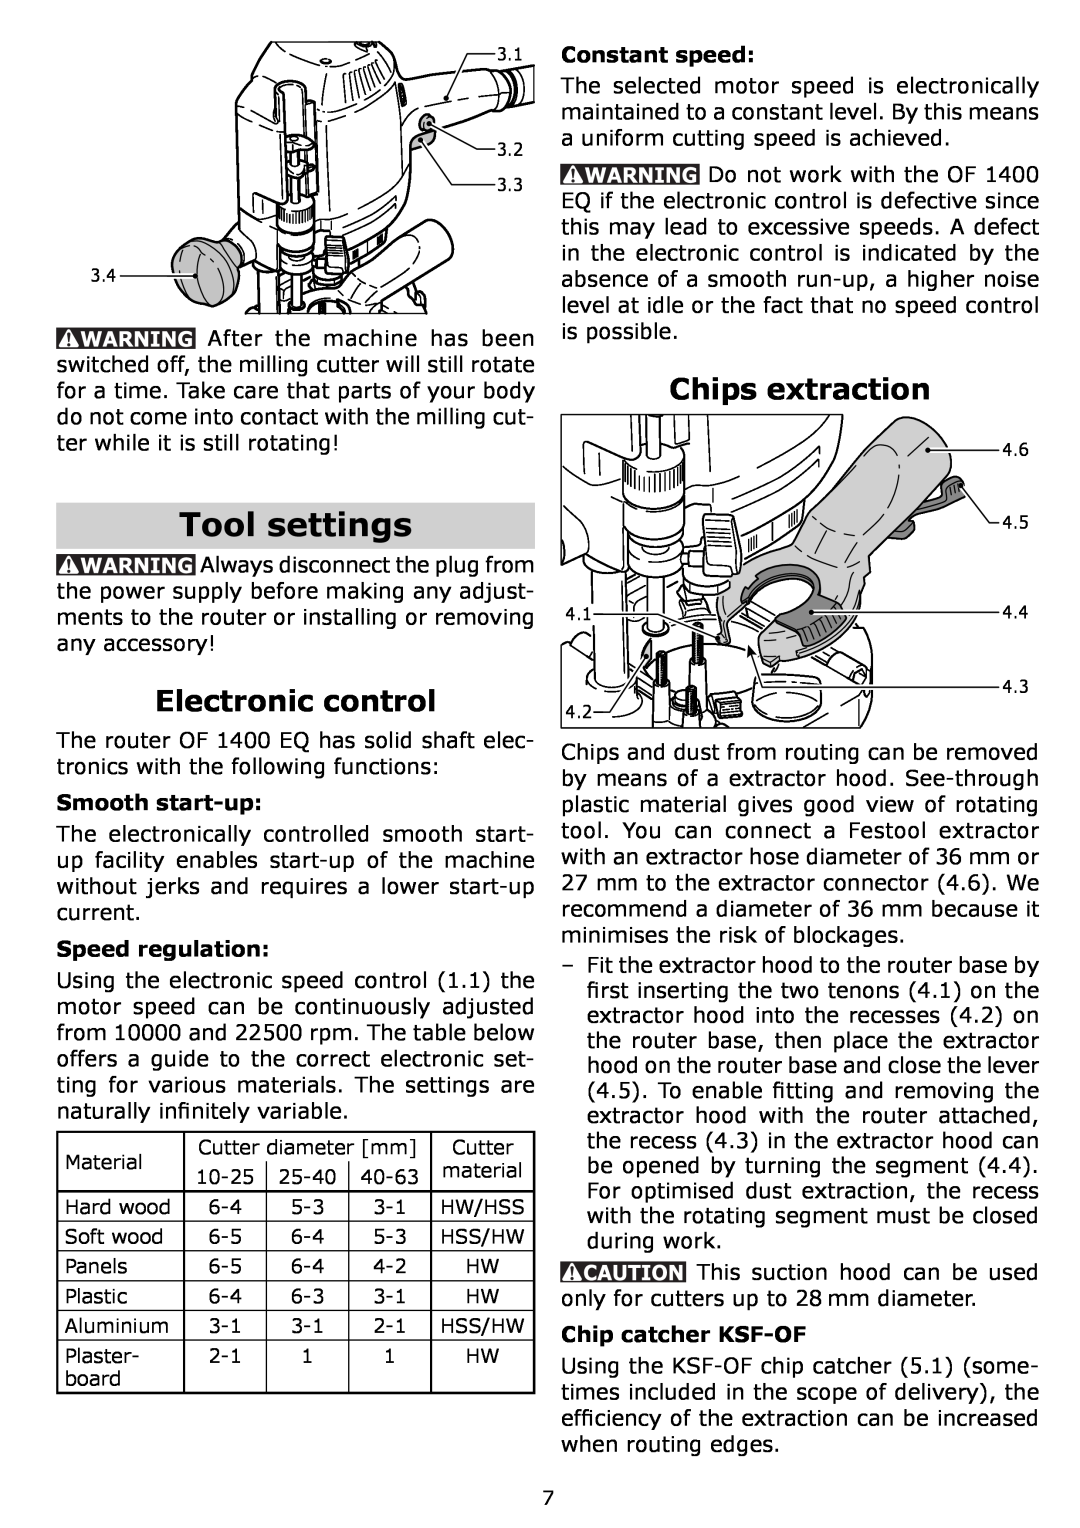 Festool PAC574342, PI574342, PN574342, OF 1400 EQ instruction manual Tool settings, Electronic control, Chips extraction 